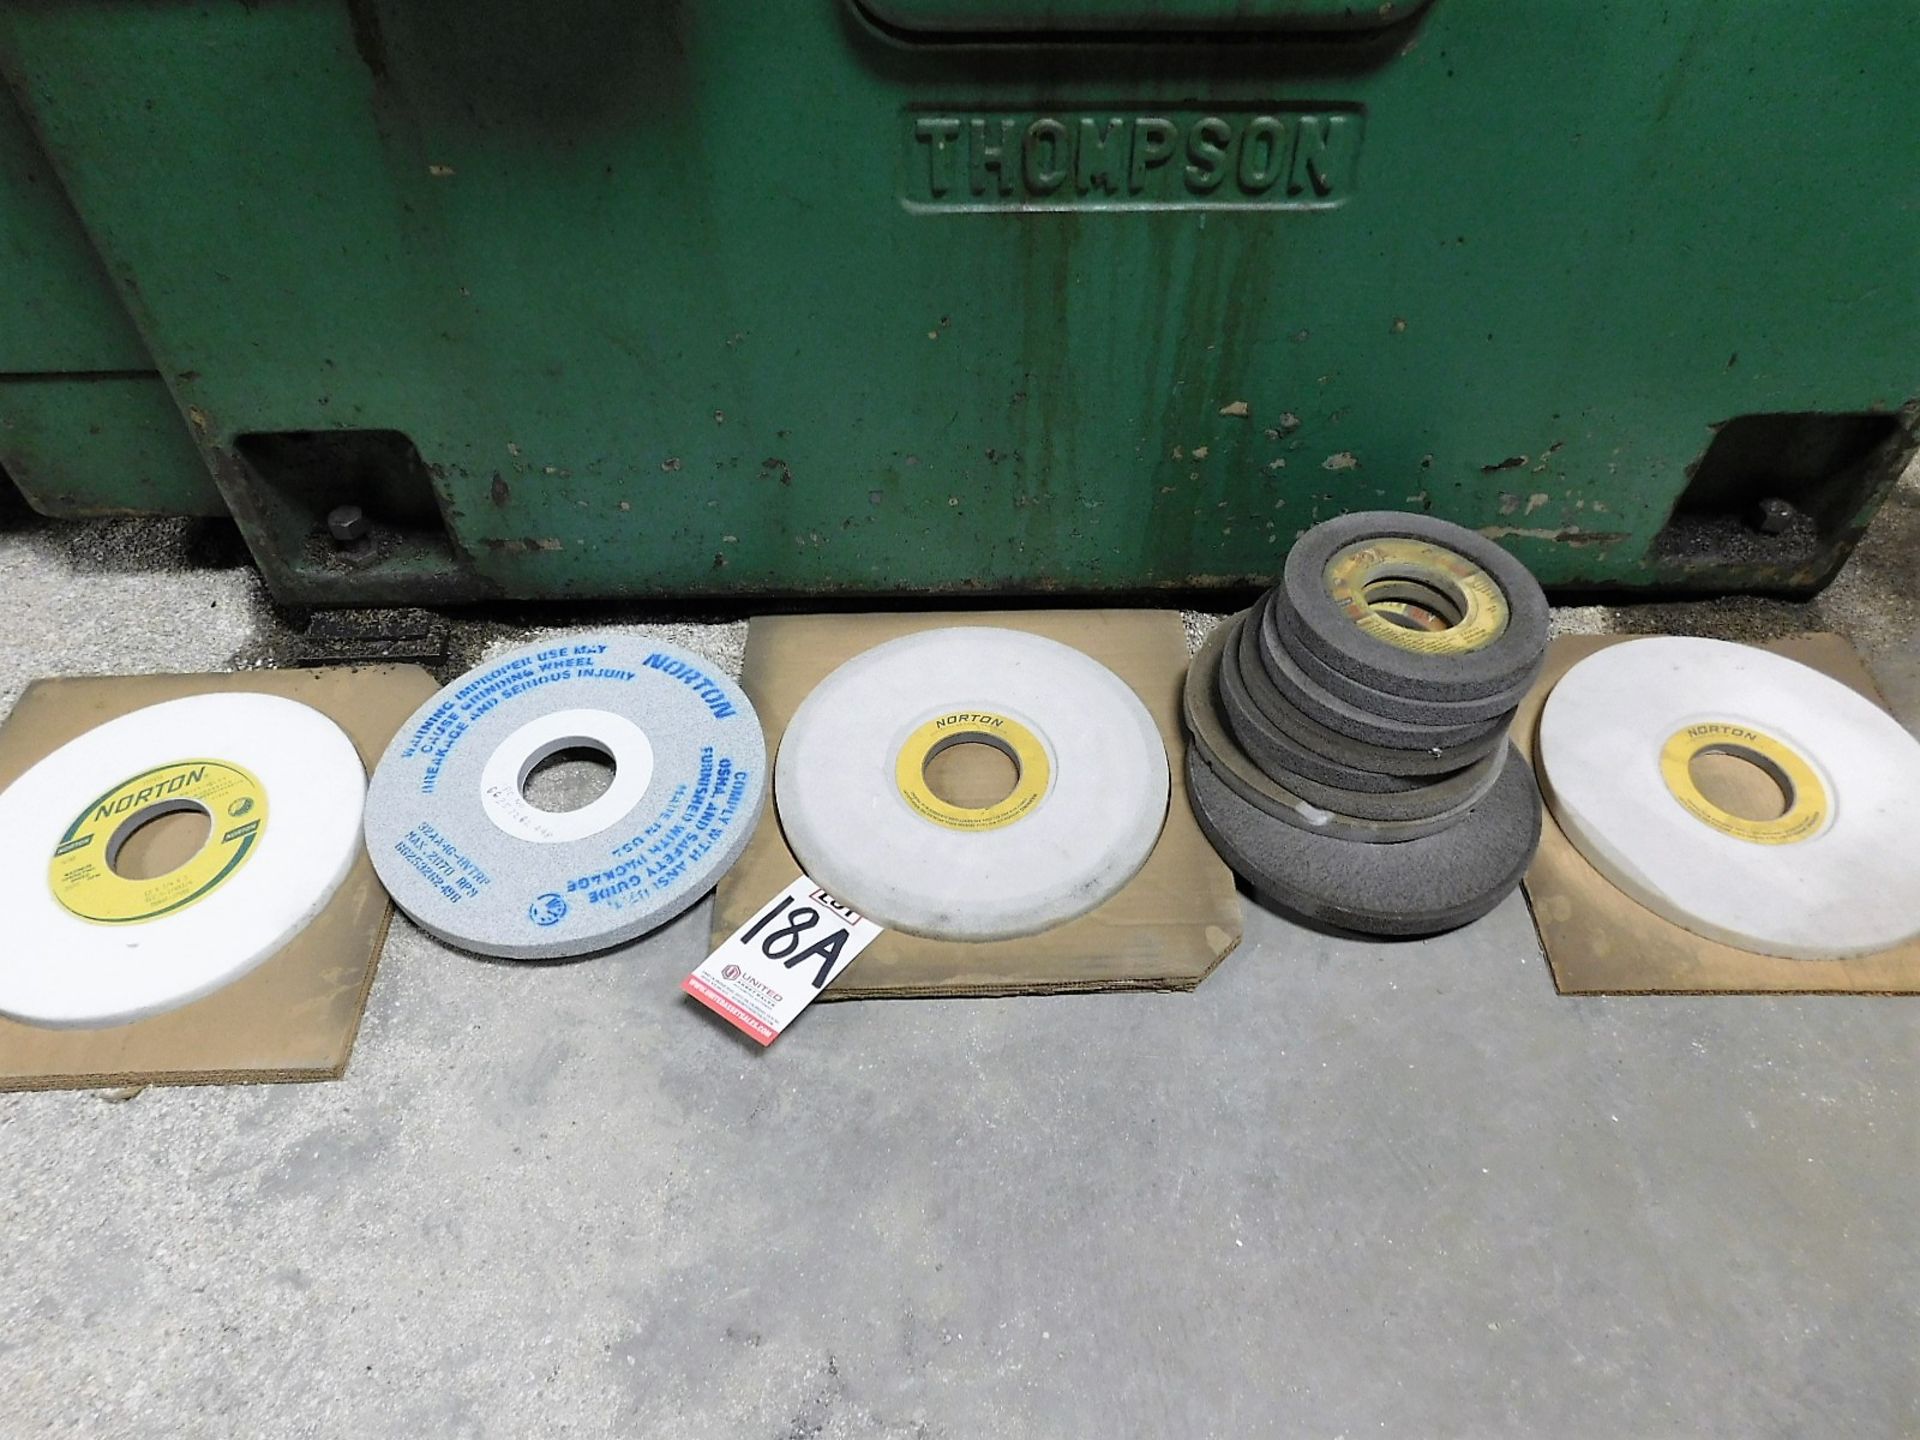 LOT - ASSORTMENT OF GRINDING WHEELS, 12", THAT FIT THE THOMPSON GRINDER